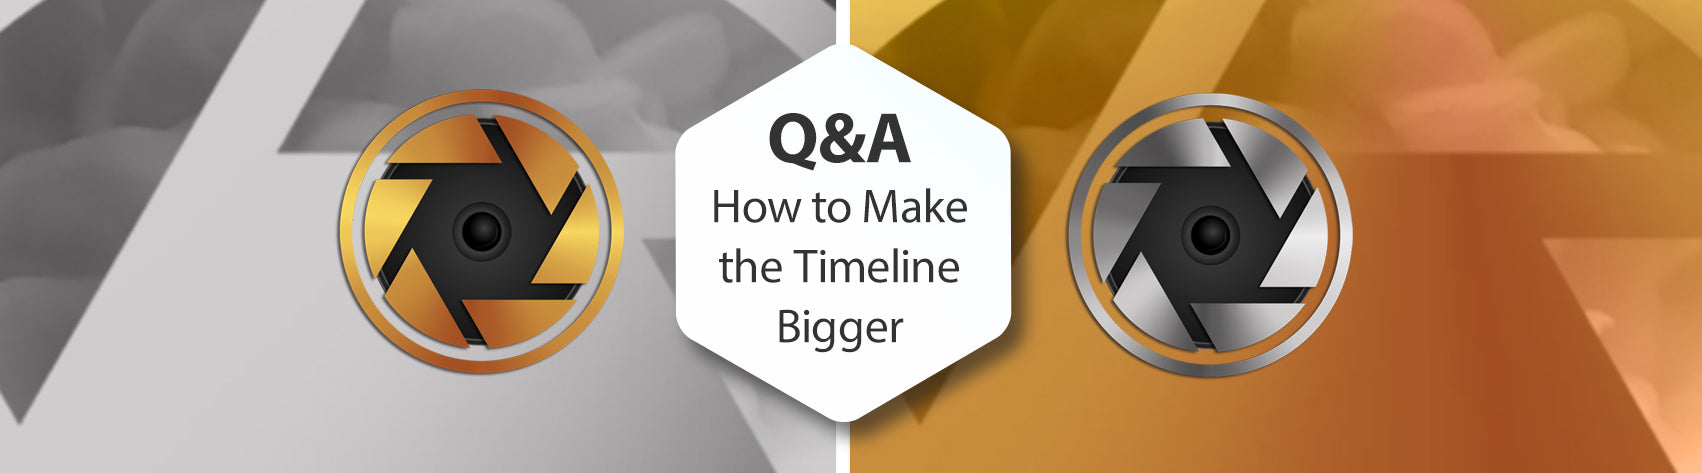 Q&A - How to Make the Timeline Bigger